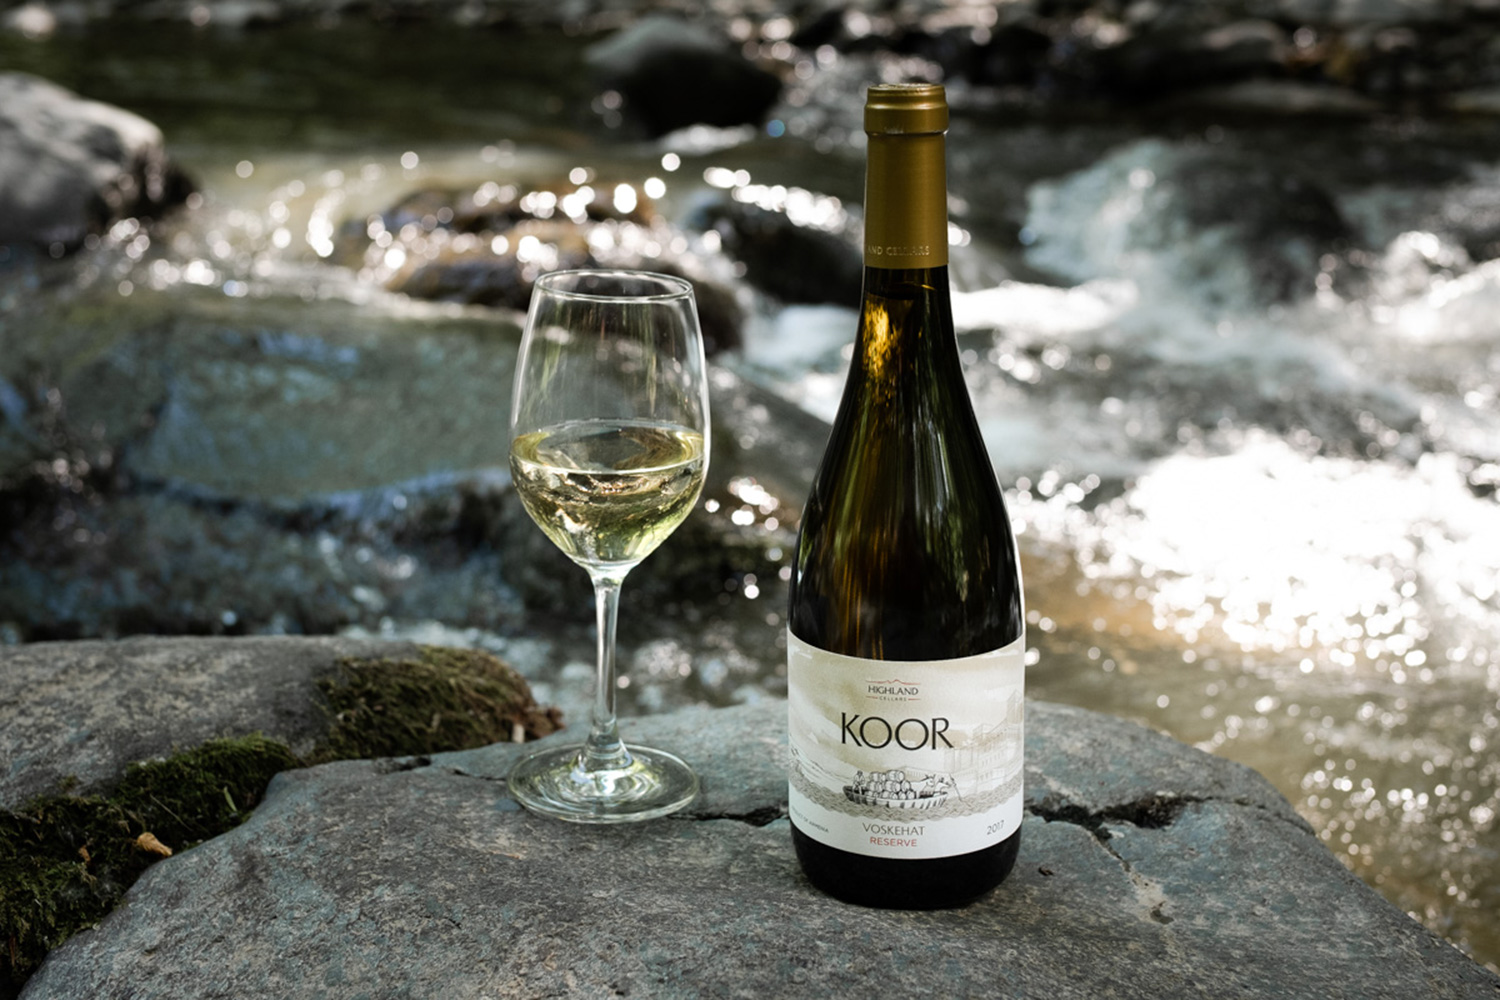 KOOR White Reserve wins two gold medals in Japan